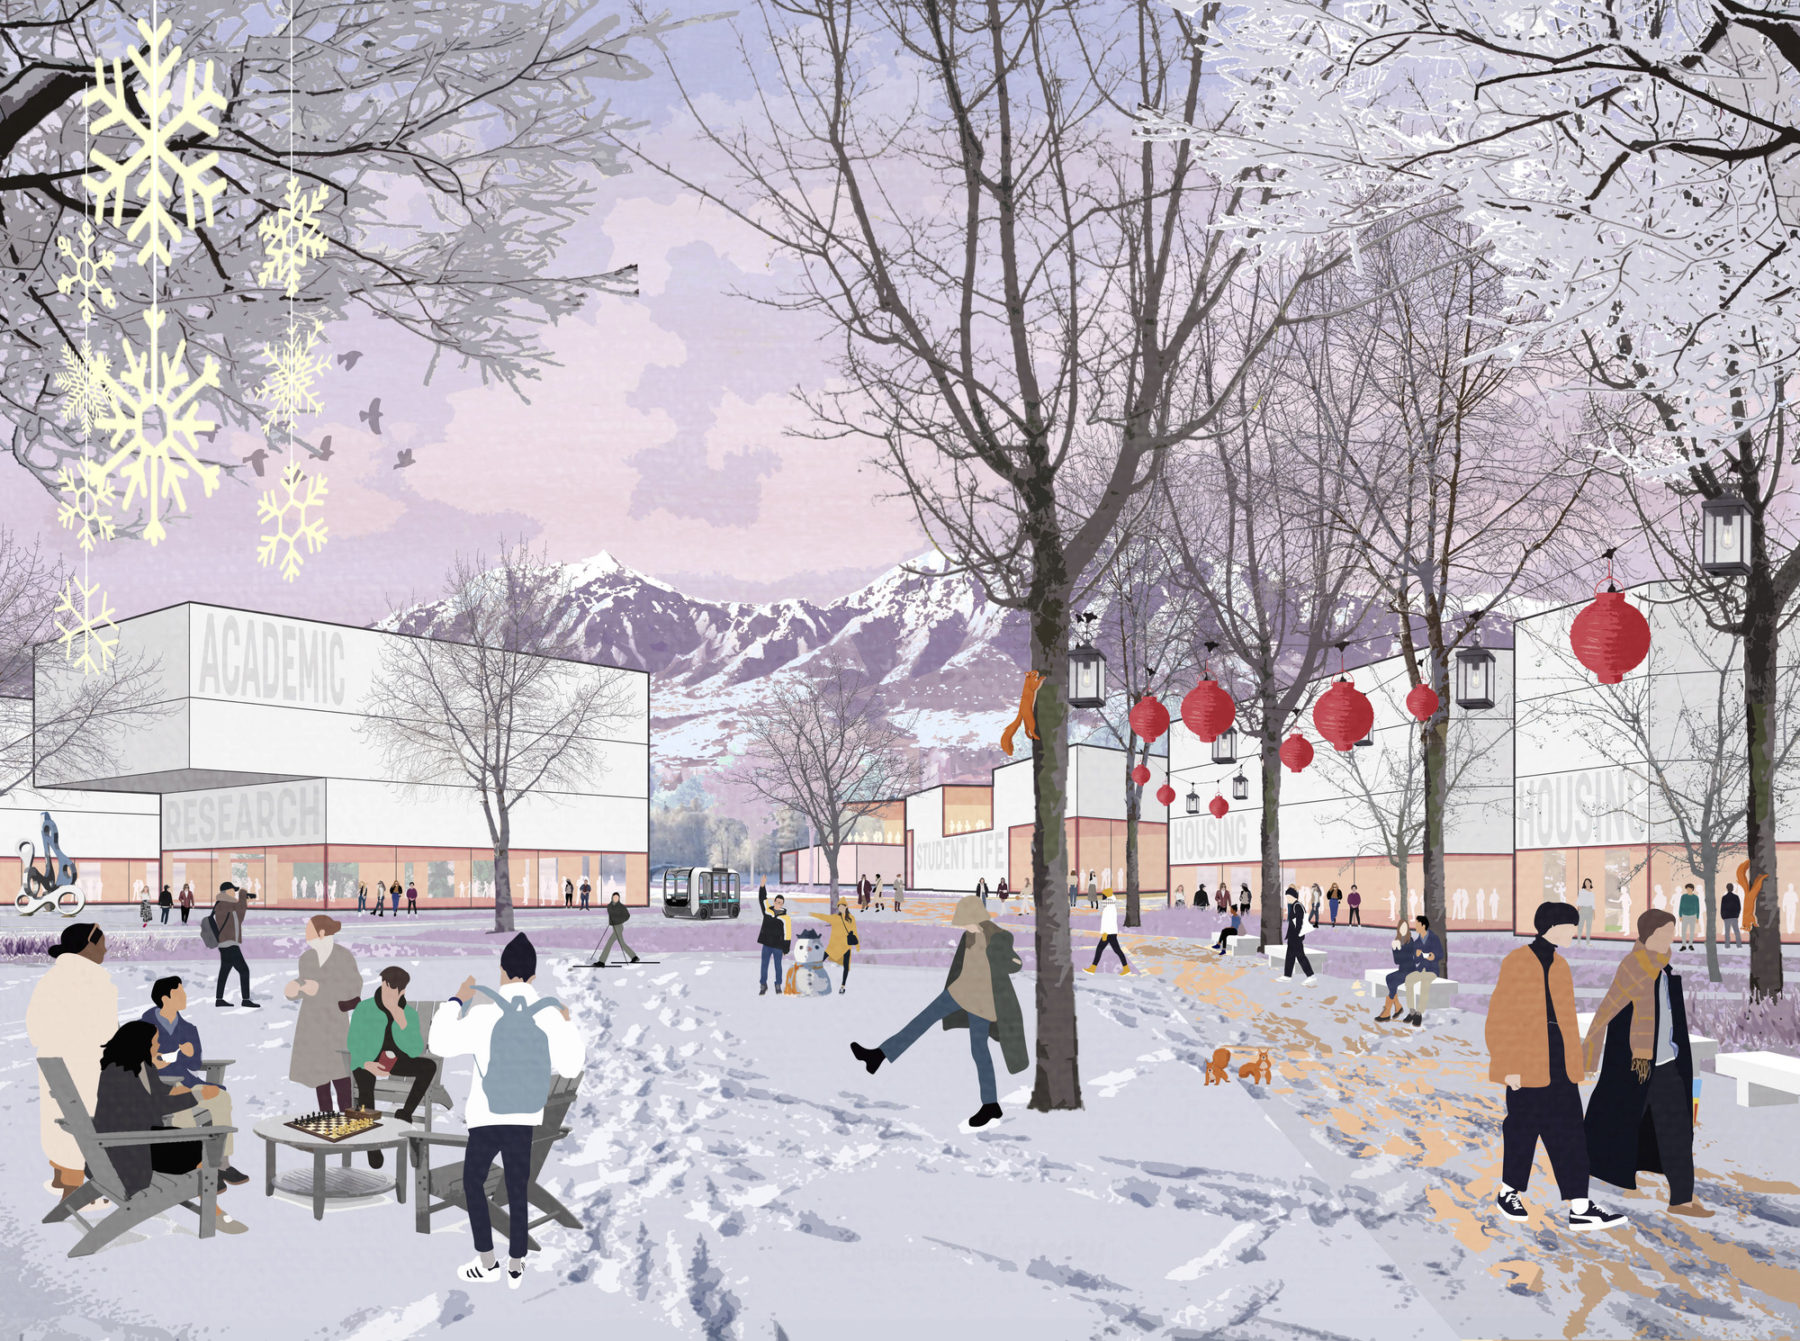 winter rendering of campus district - students enjoy the snow